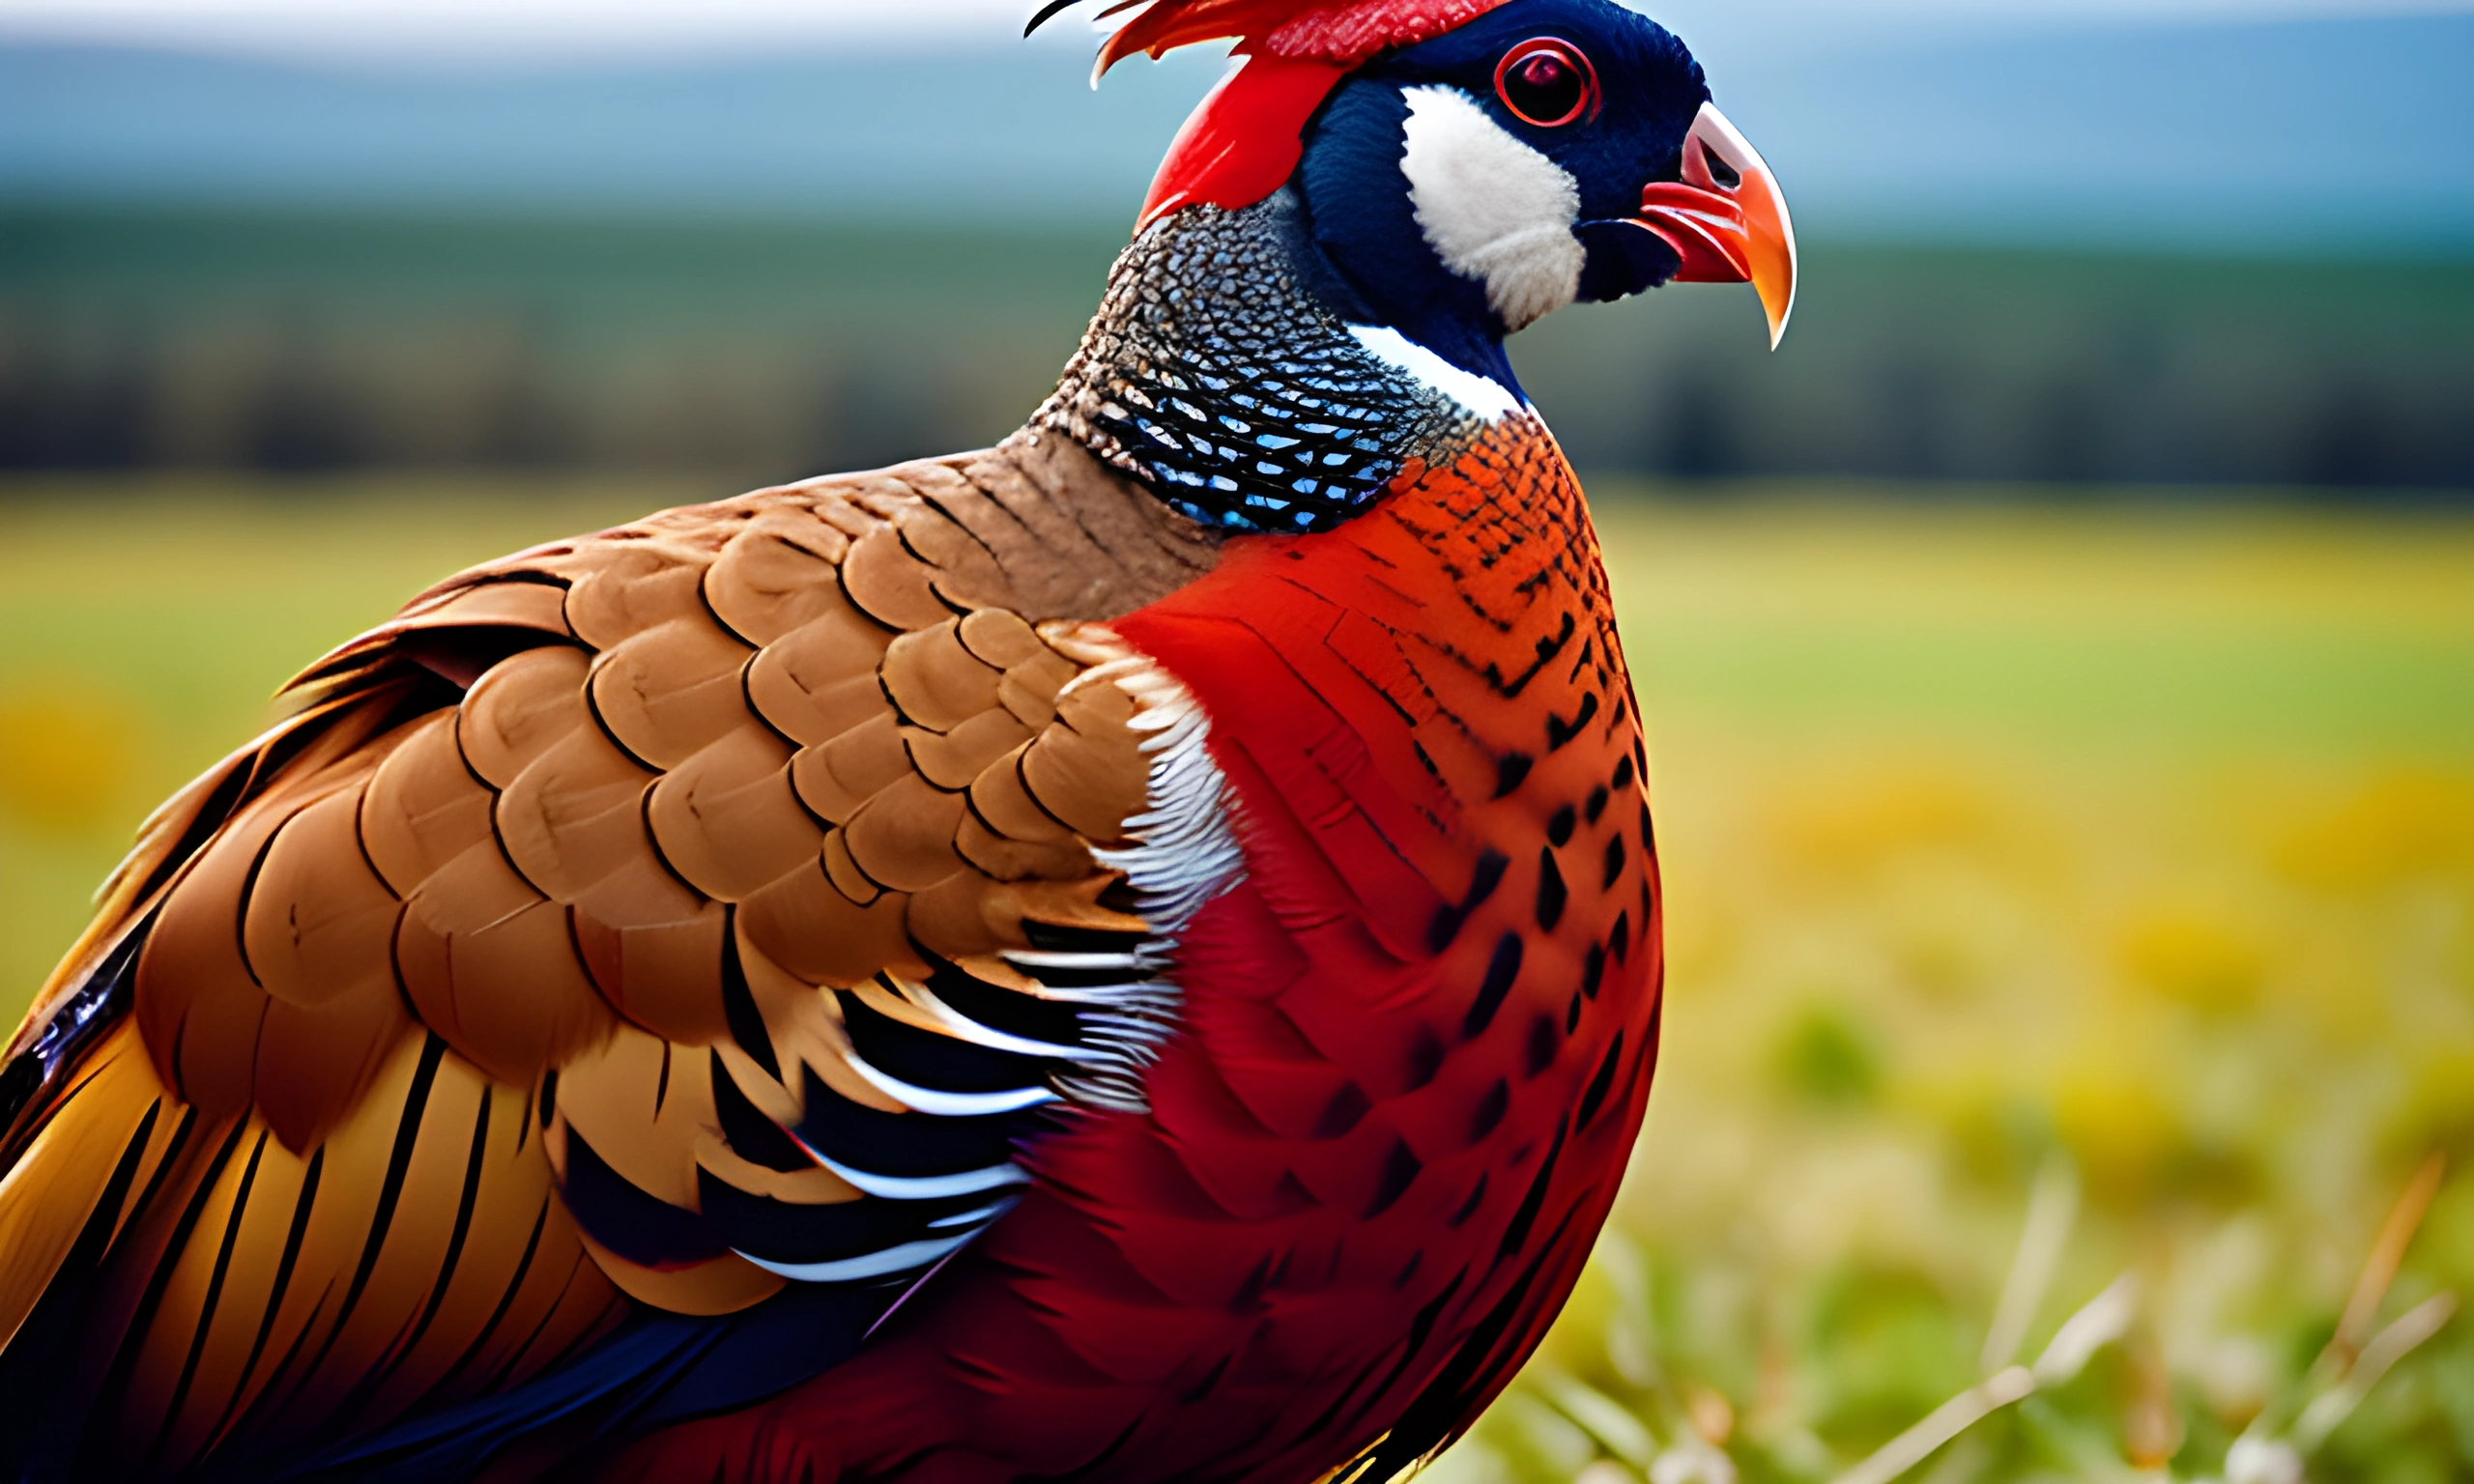 bird with a red head and blue tail standing in a field